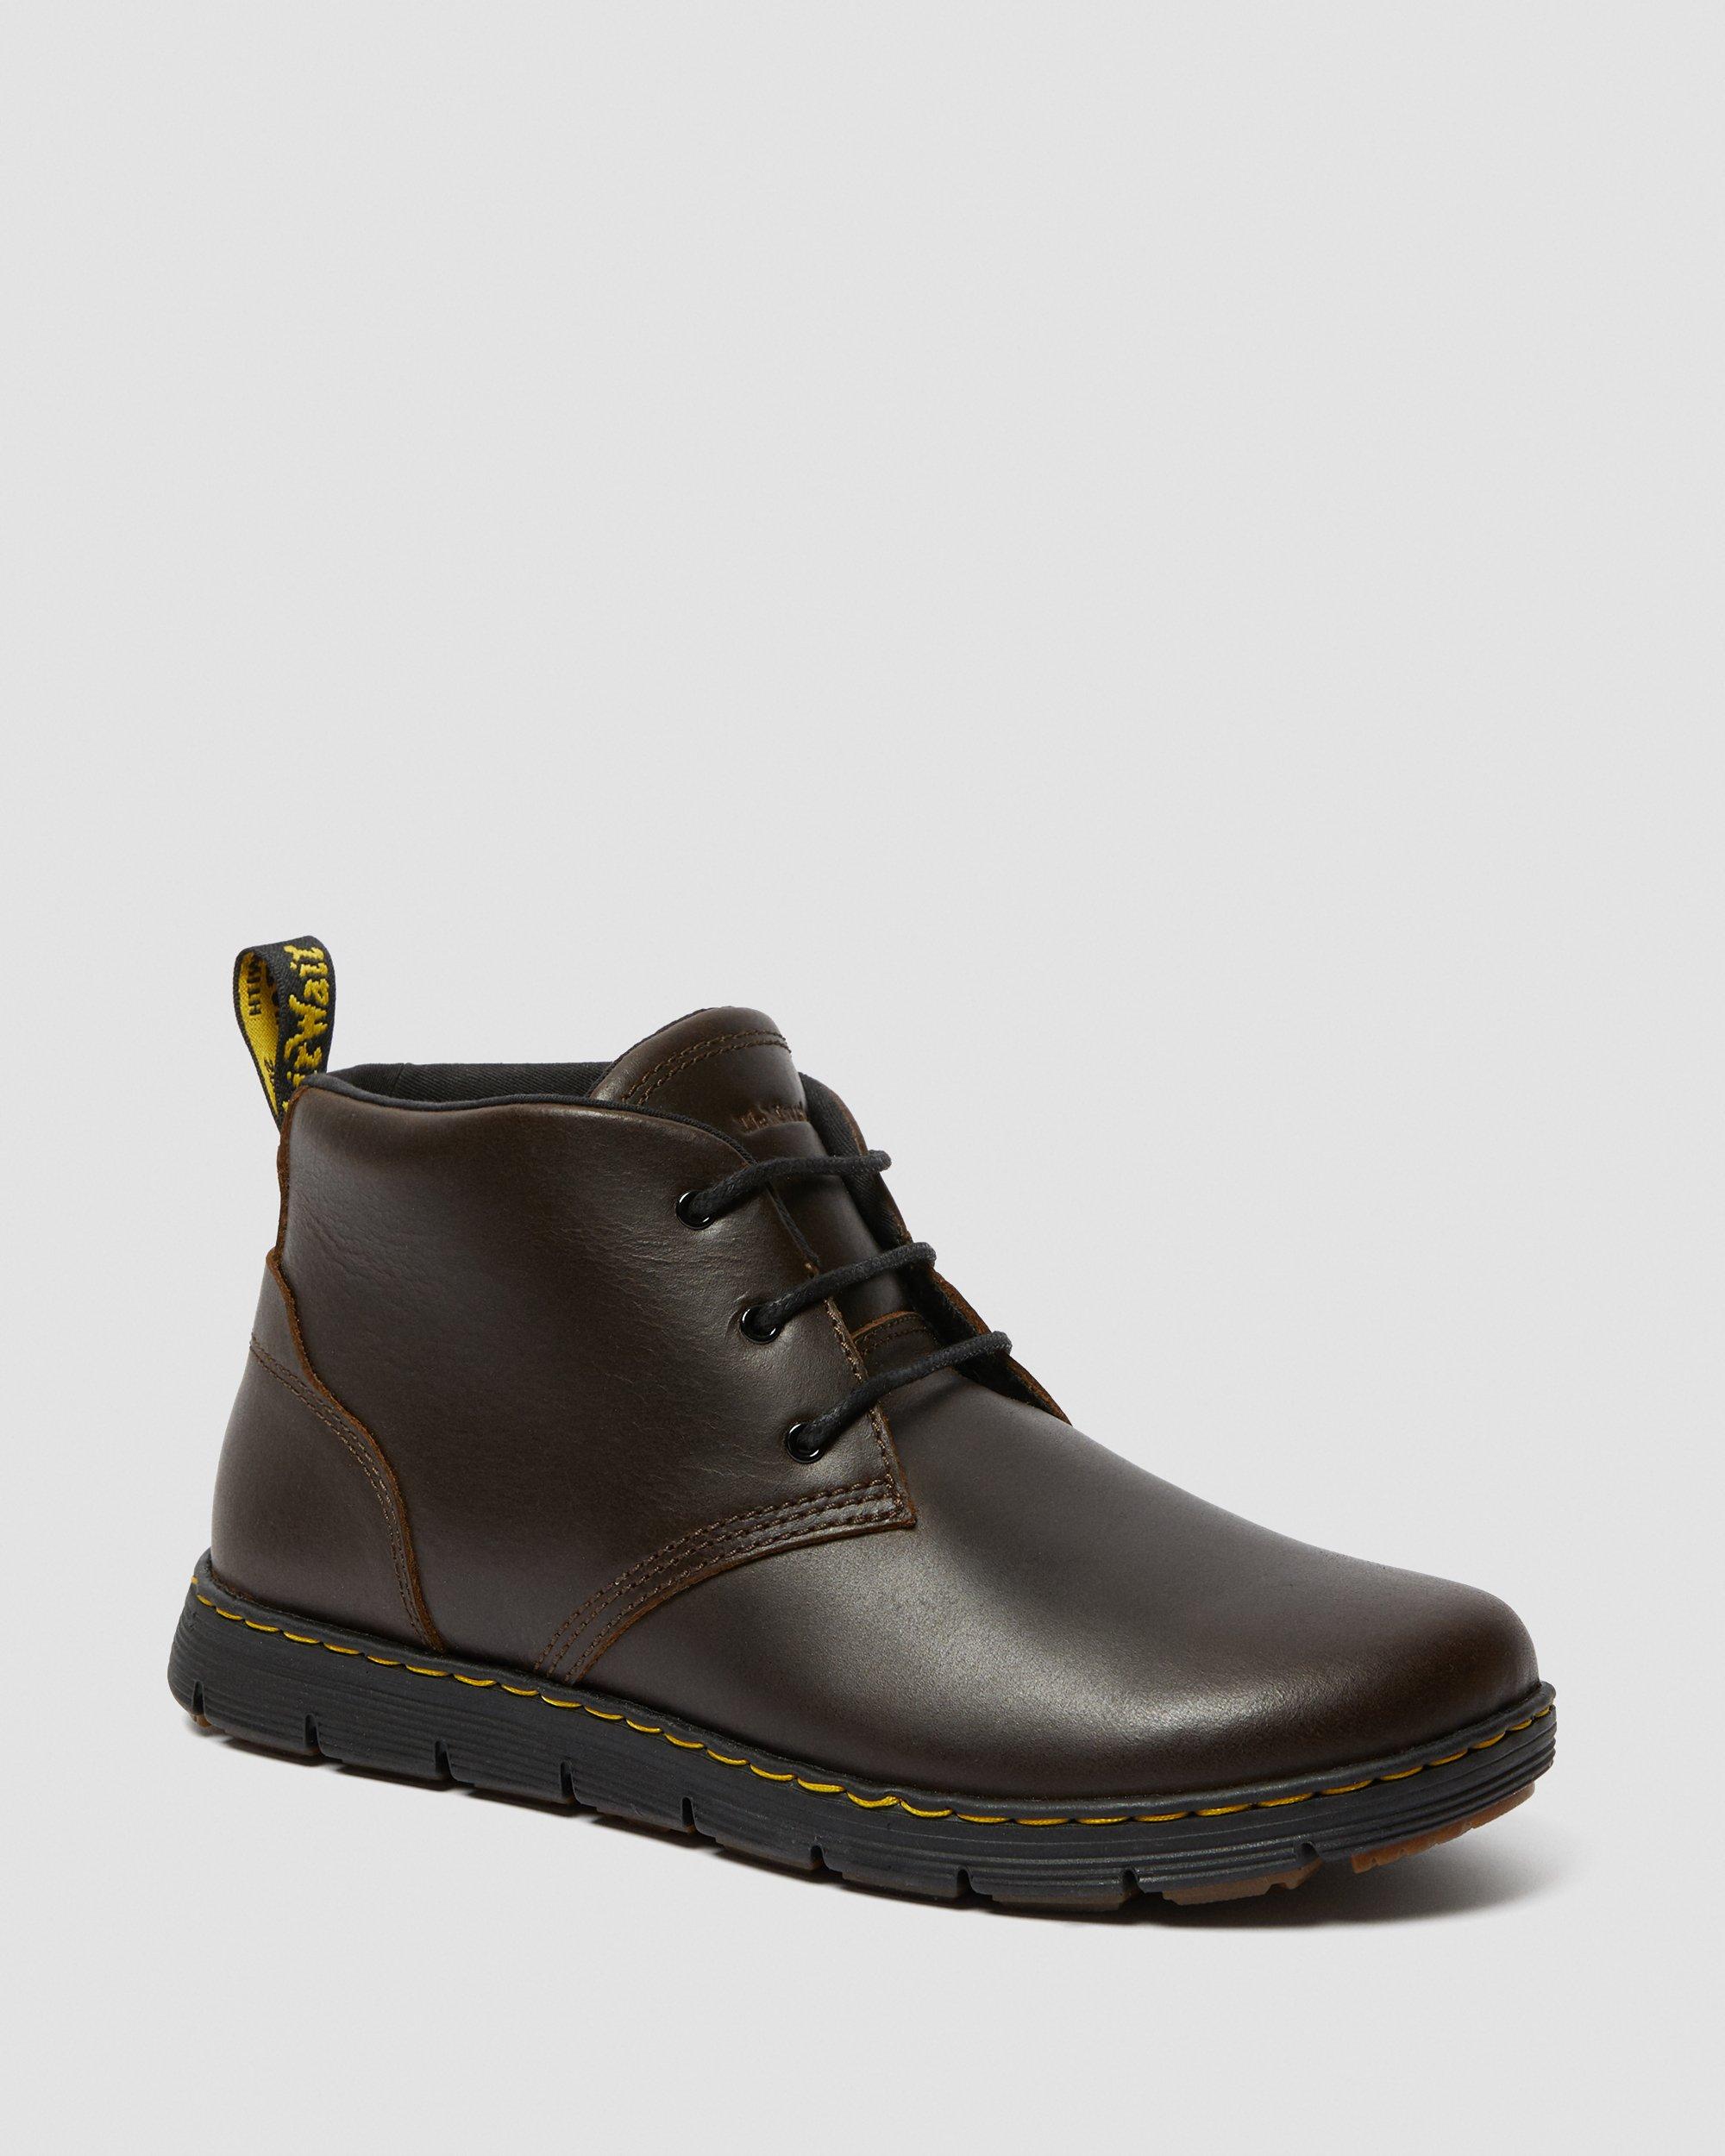 mens leather chukka boots sale